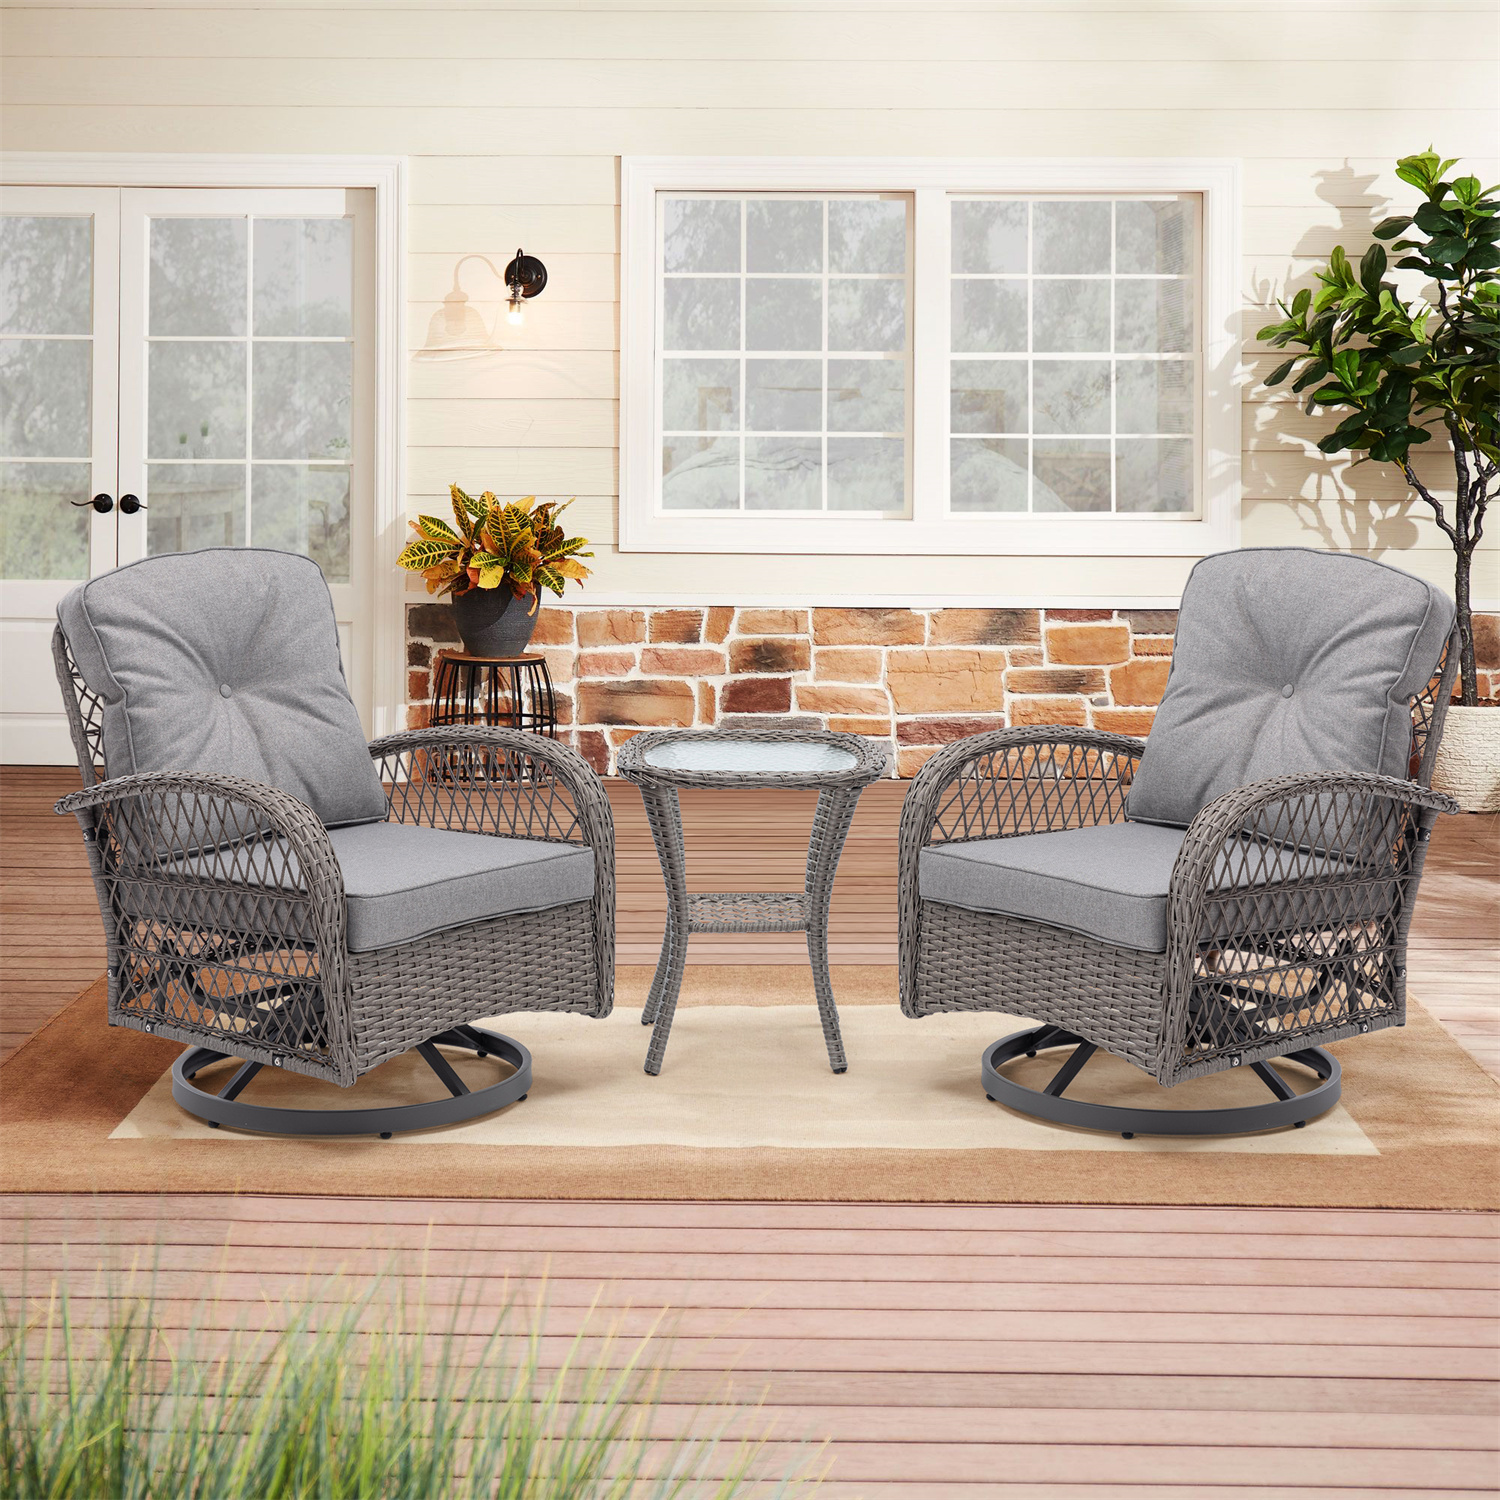 3 Pieces Patio Furniture Set, Outdoor Swivel Chair Glider Rocker, Wicker Bistro Set with 2 Thick Cushions Chairs and Side Table All-Weather Rattan Conversation Set for Garden Balcony Backyard, Grey - image 1 of 1